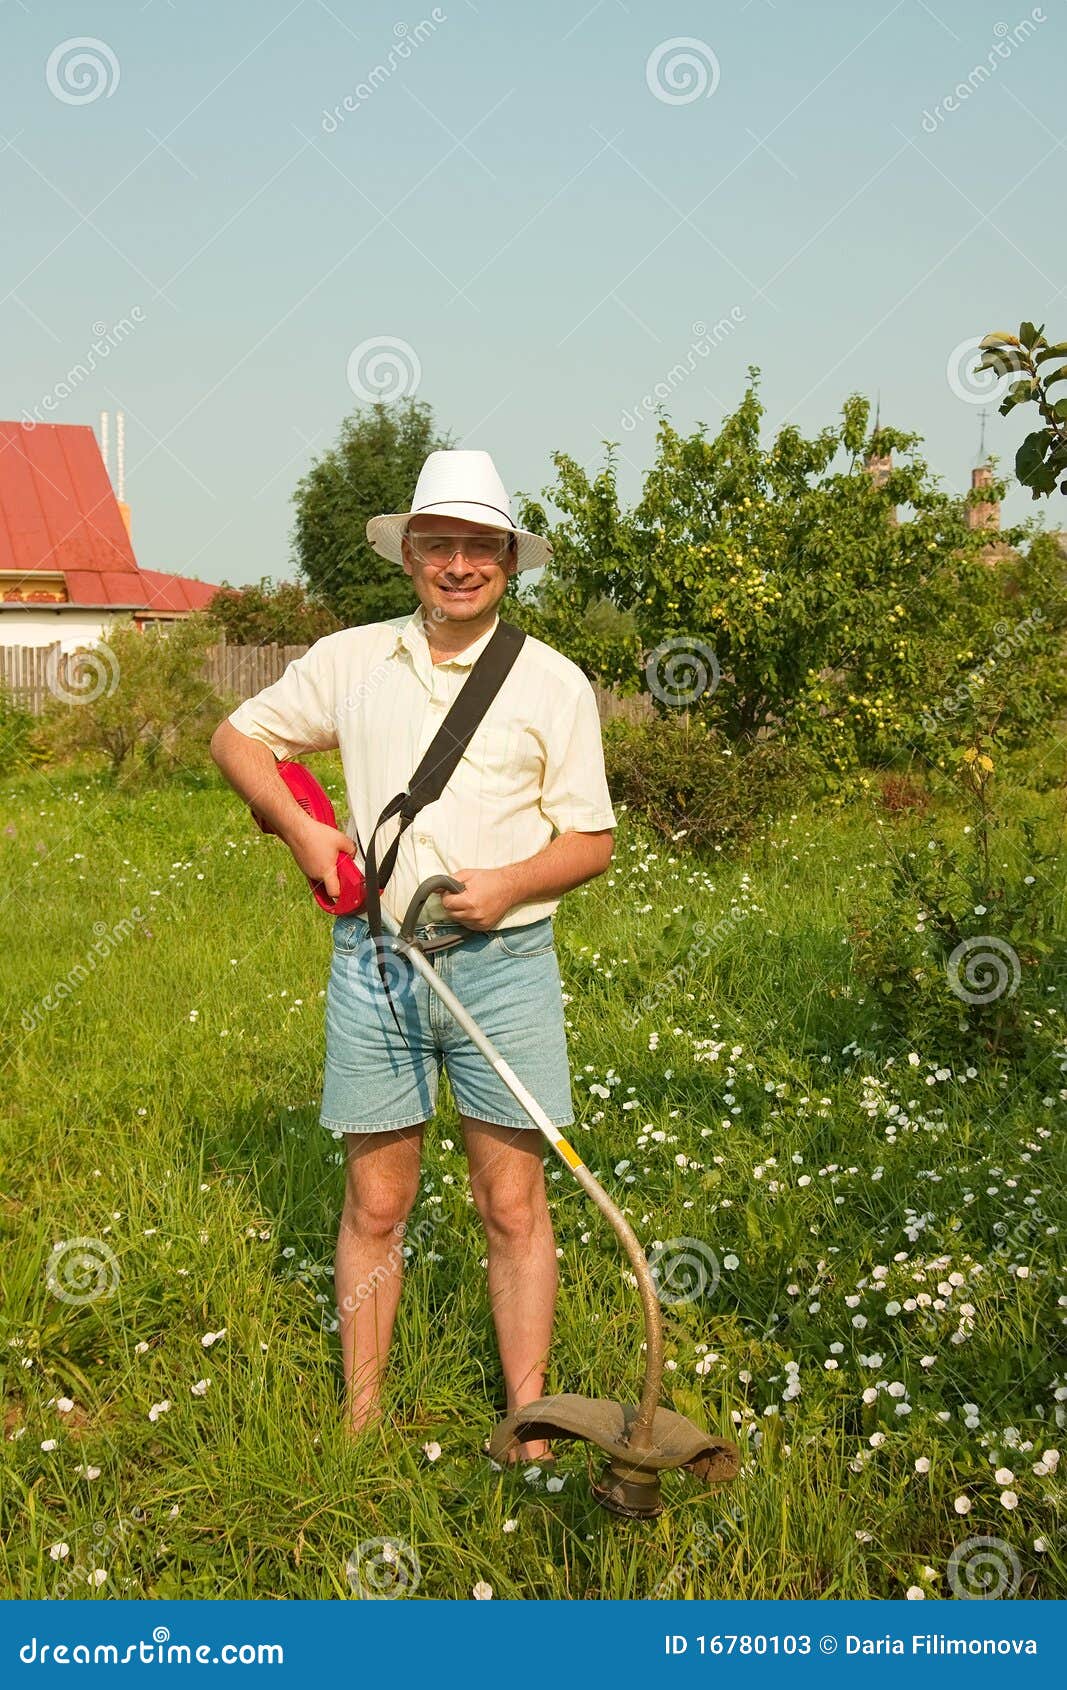 Adult Gardener Working in the Yard Stock Image - Image of grasscutter ...